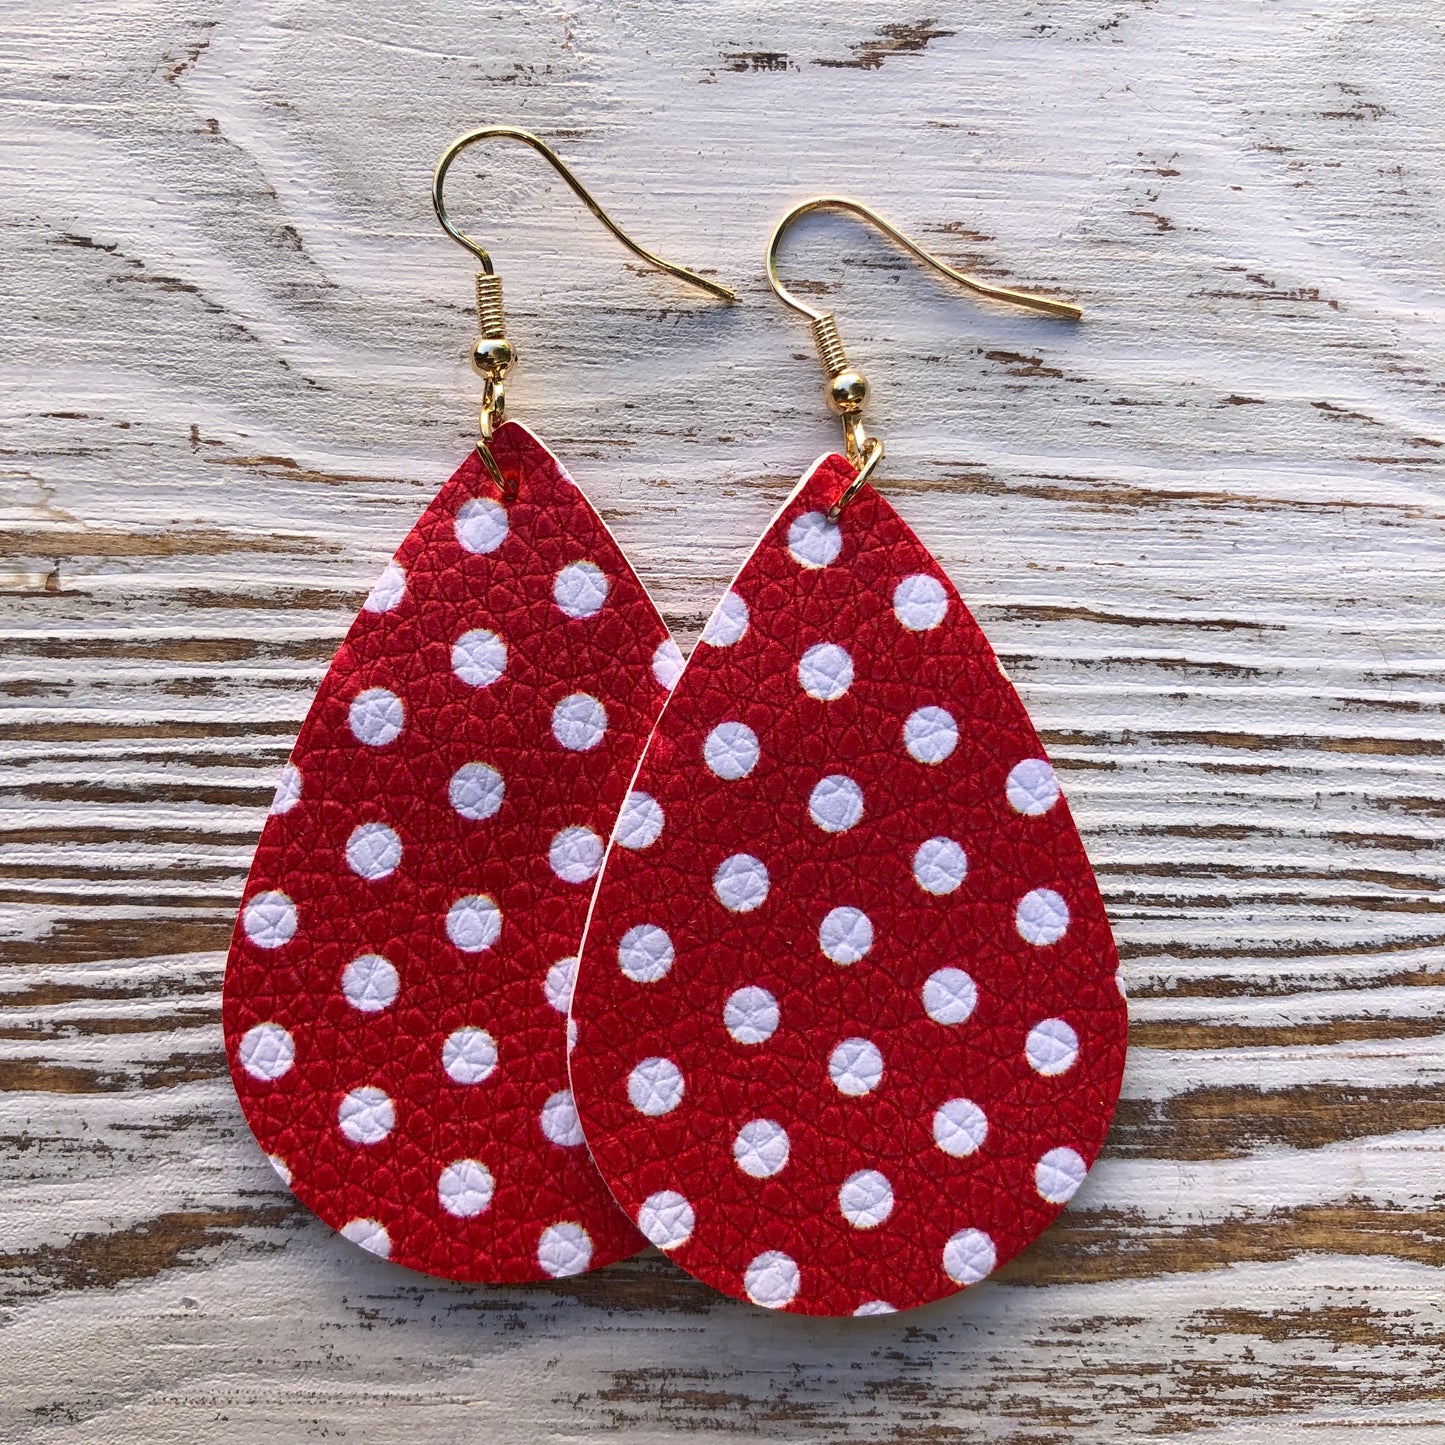 Red and White Polka Dot Leather Earrings